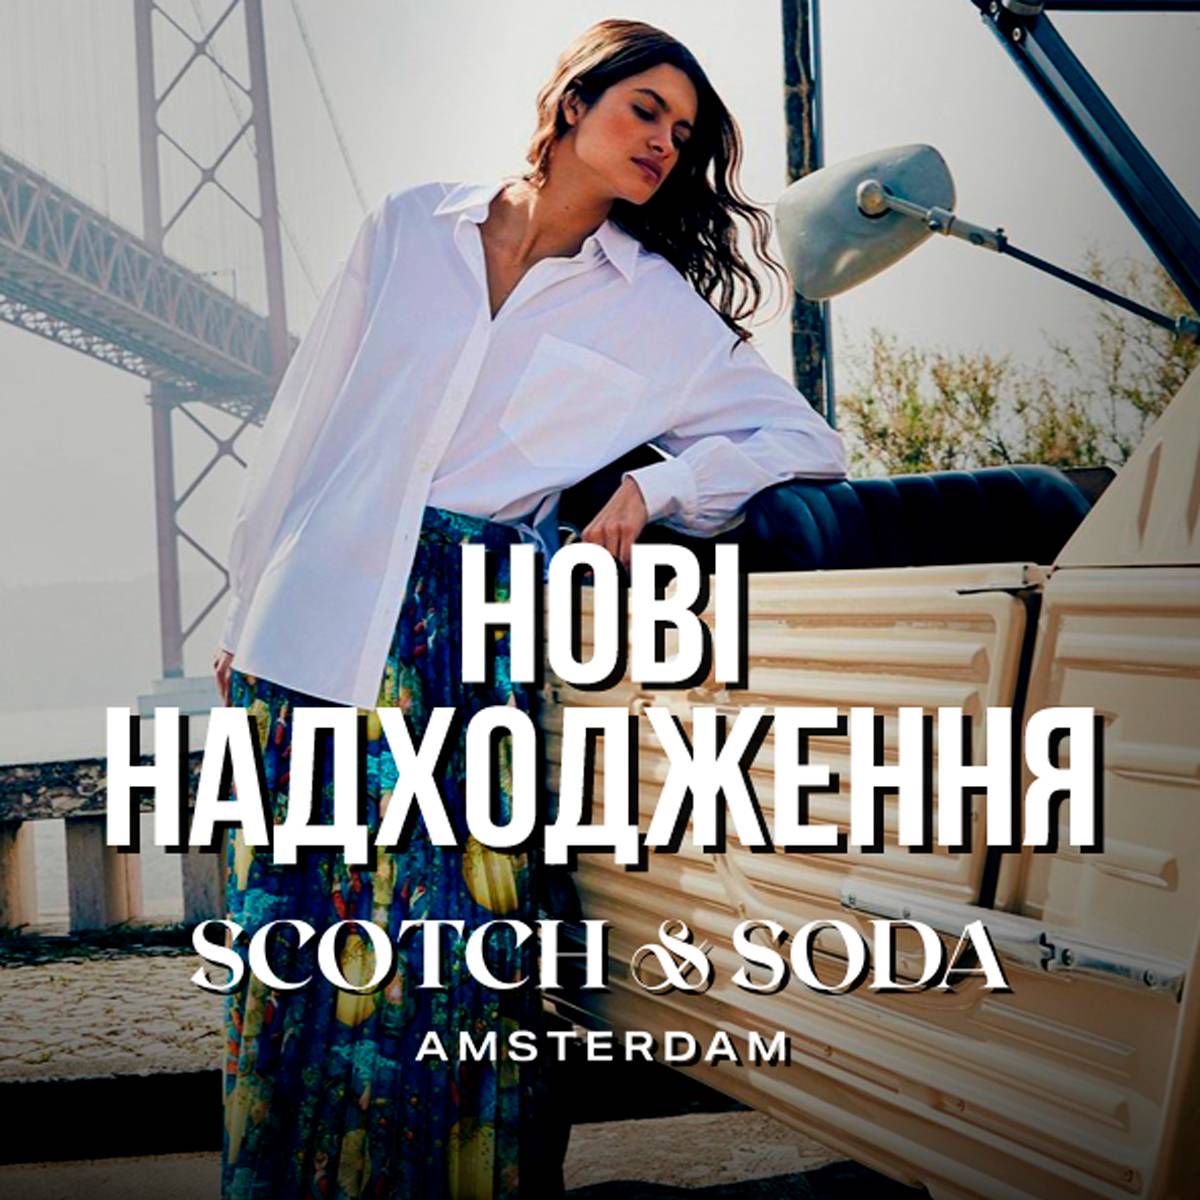 NEW ARRIVALS FROM SCOTCH&SODA